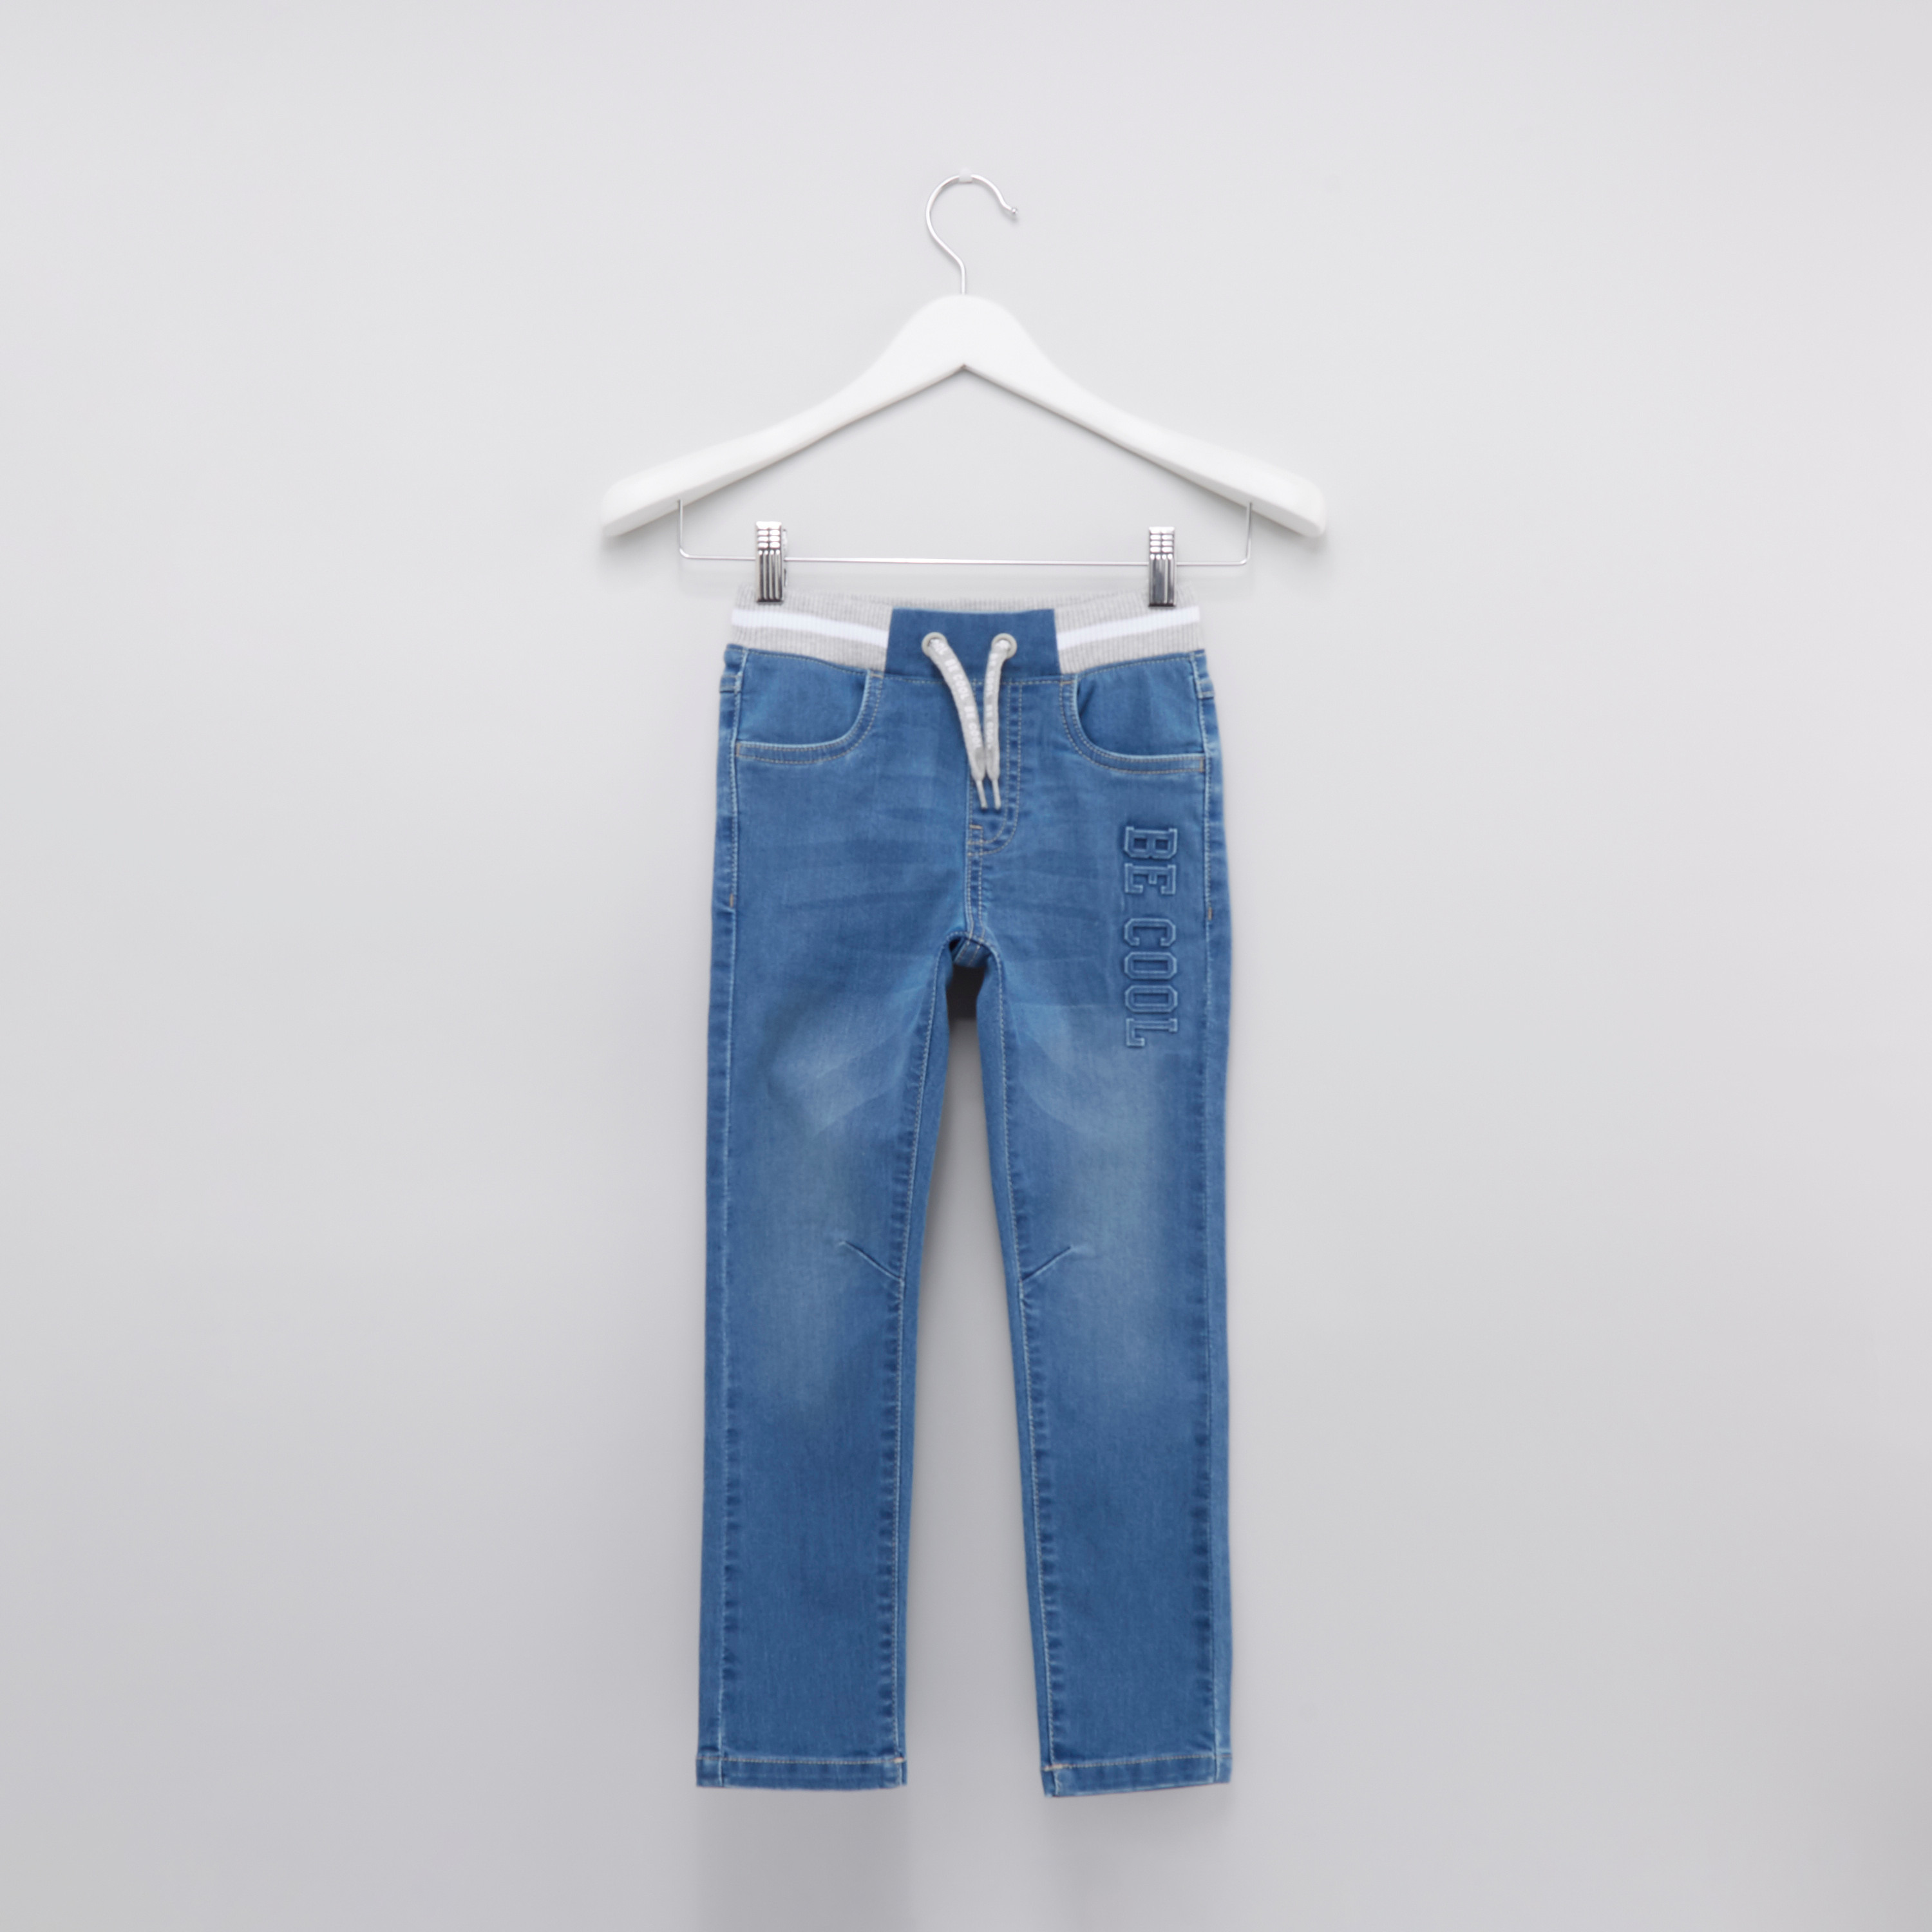 Shop Embossed Denim Pants with 4-Pockets and Drawstring Closure 